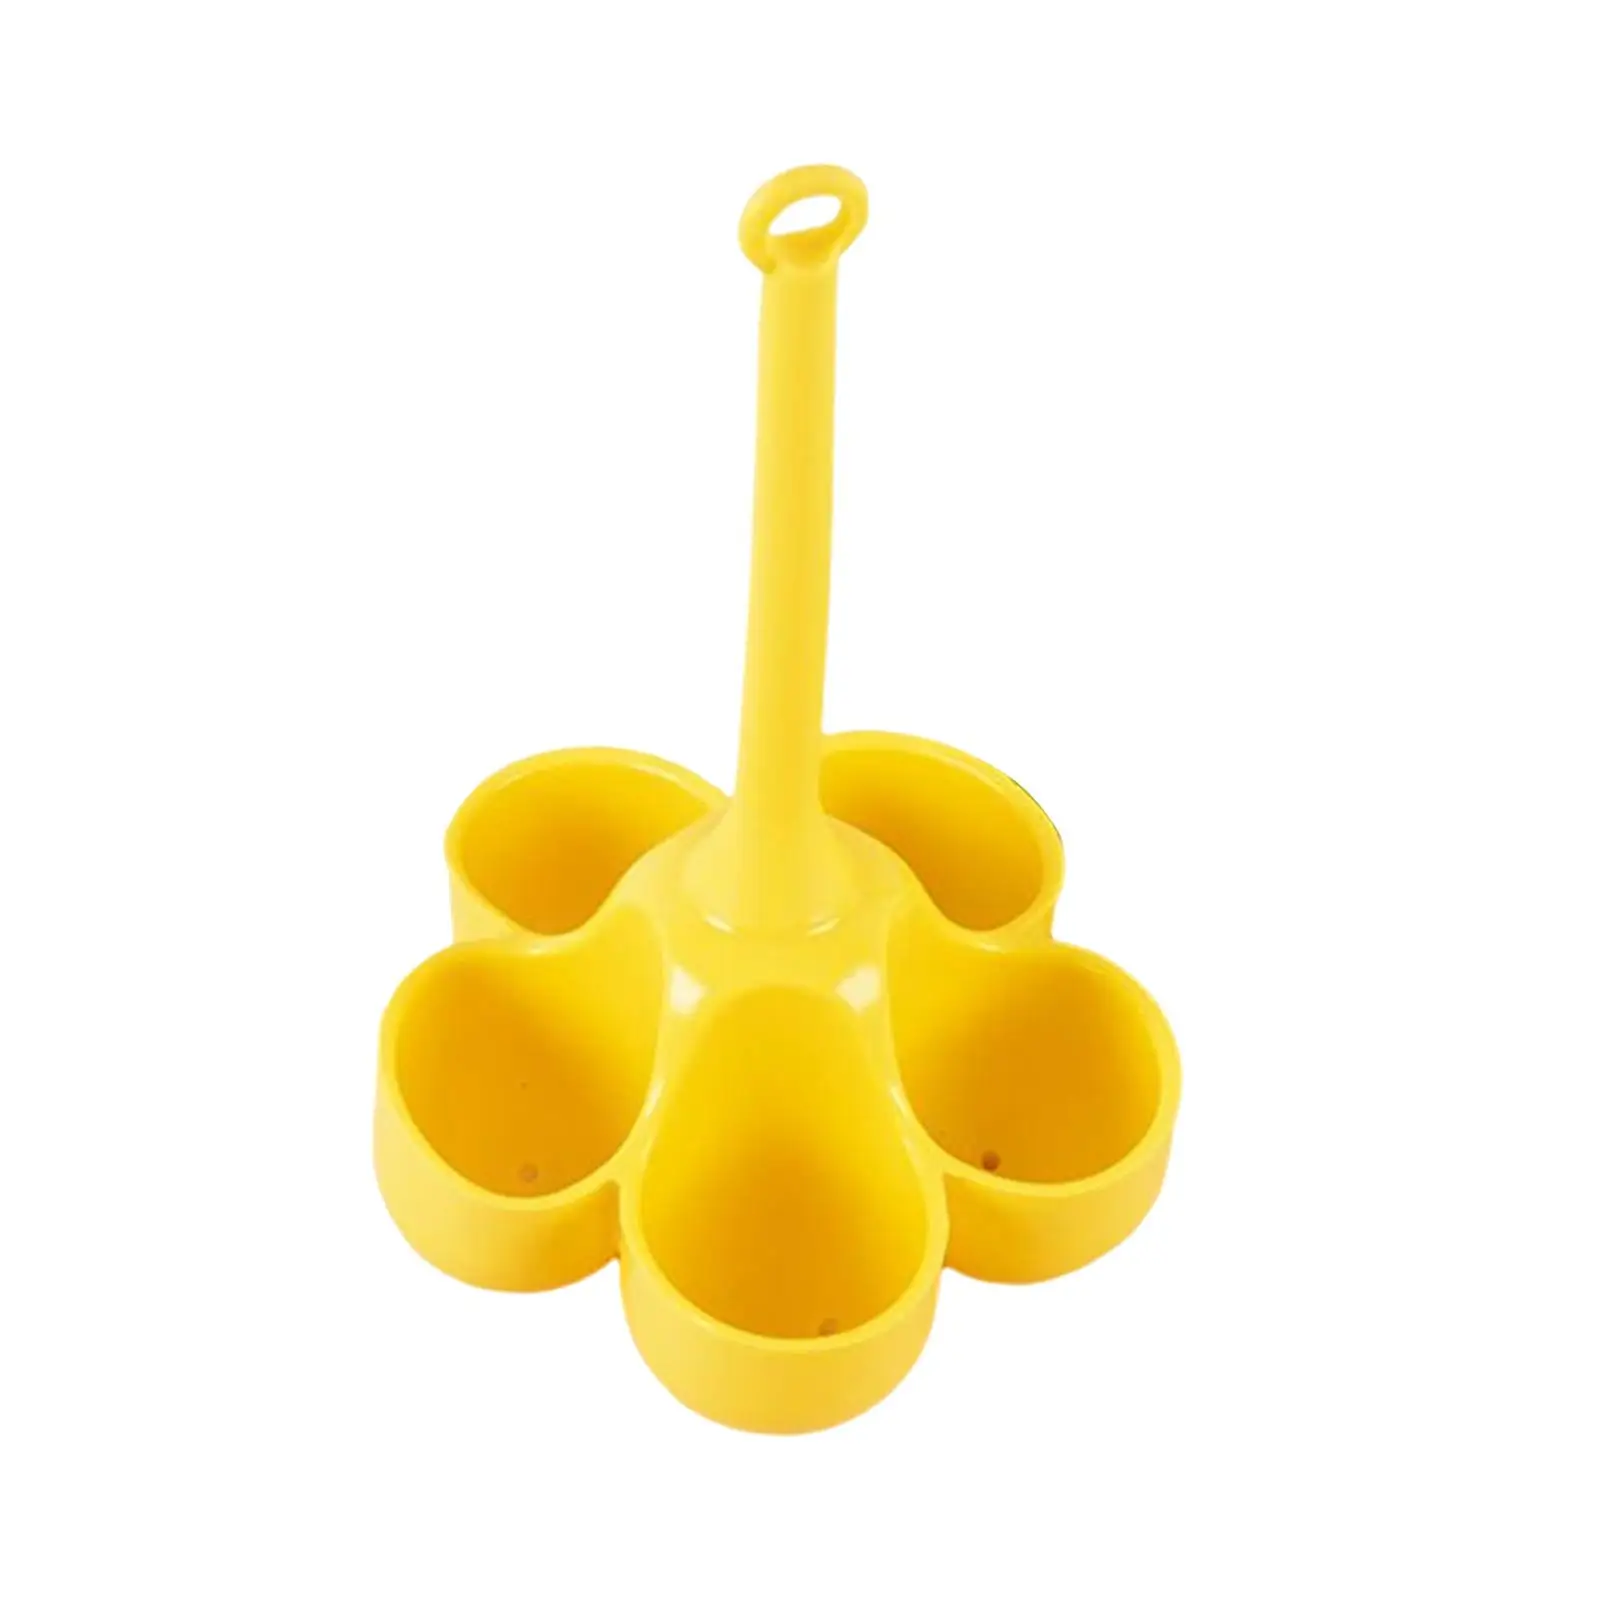 Steamed Egg Tray Cookware Gadgets Dining Steaming or Boiling for Home Office